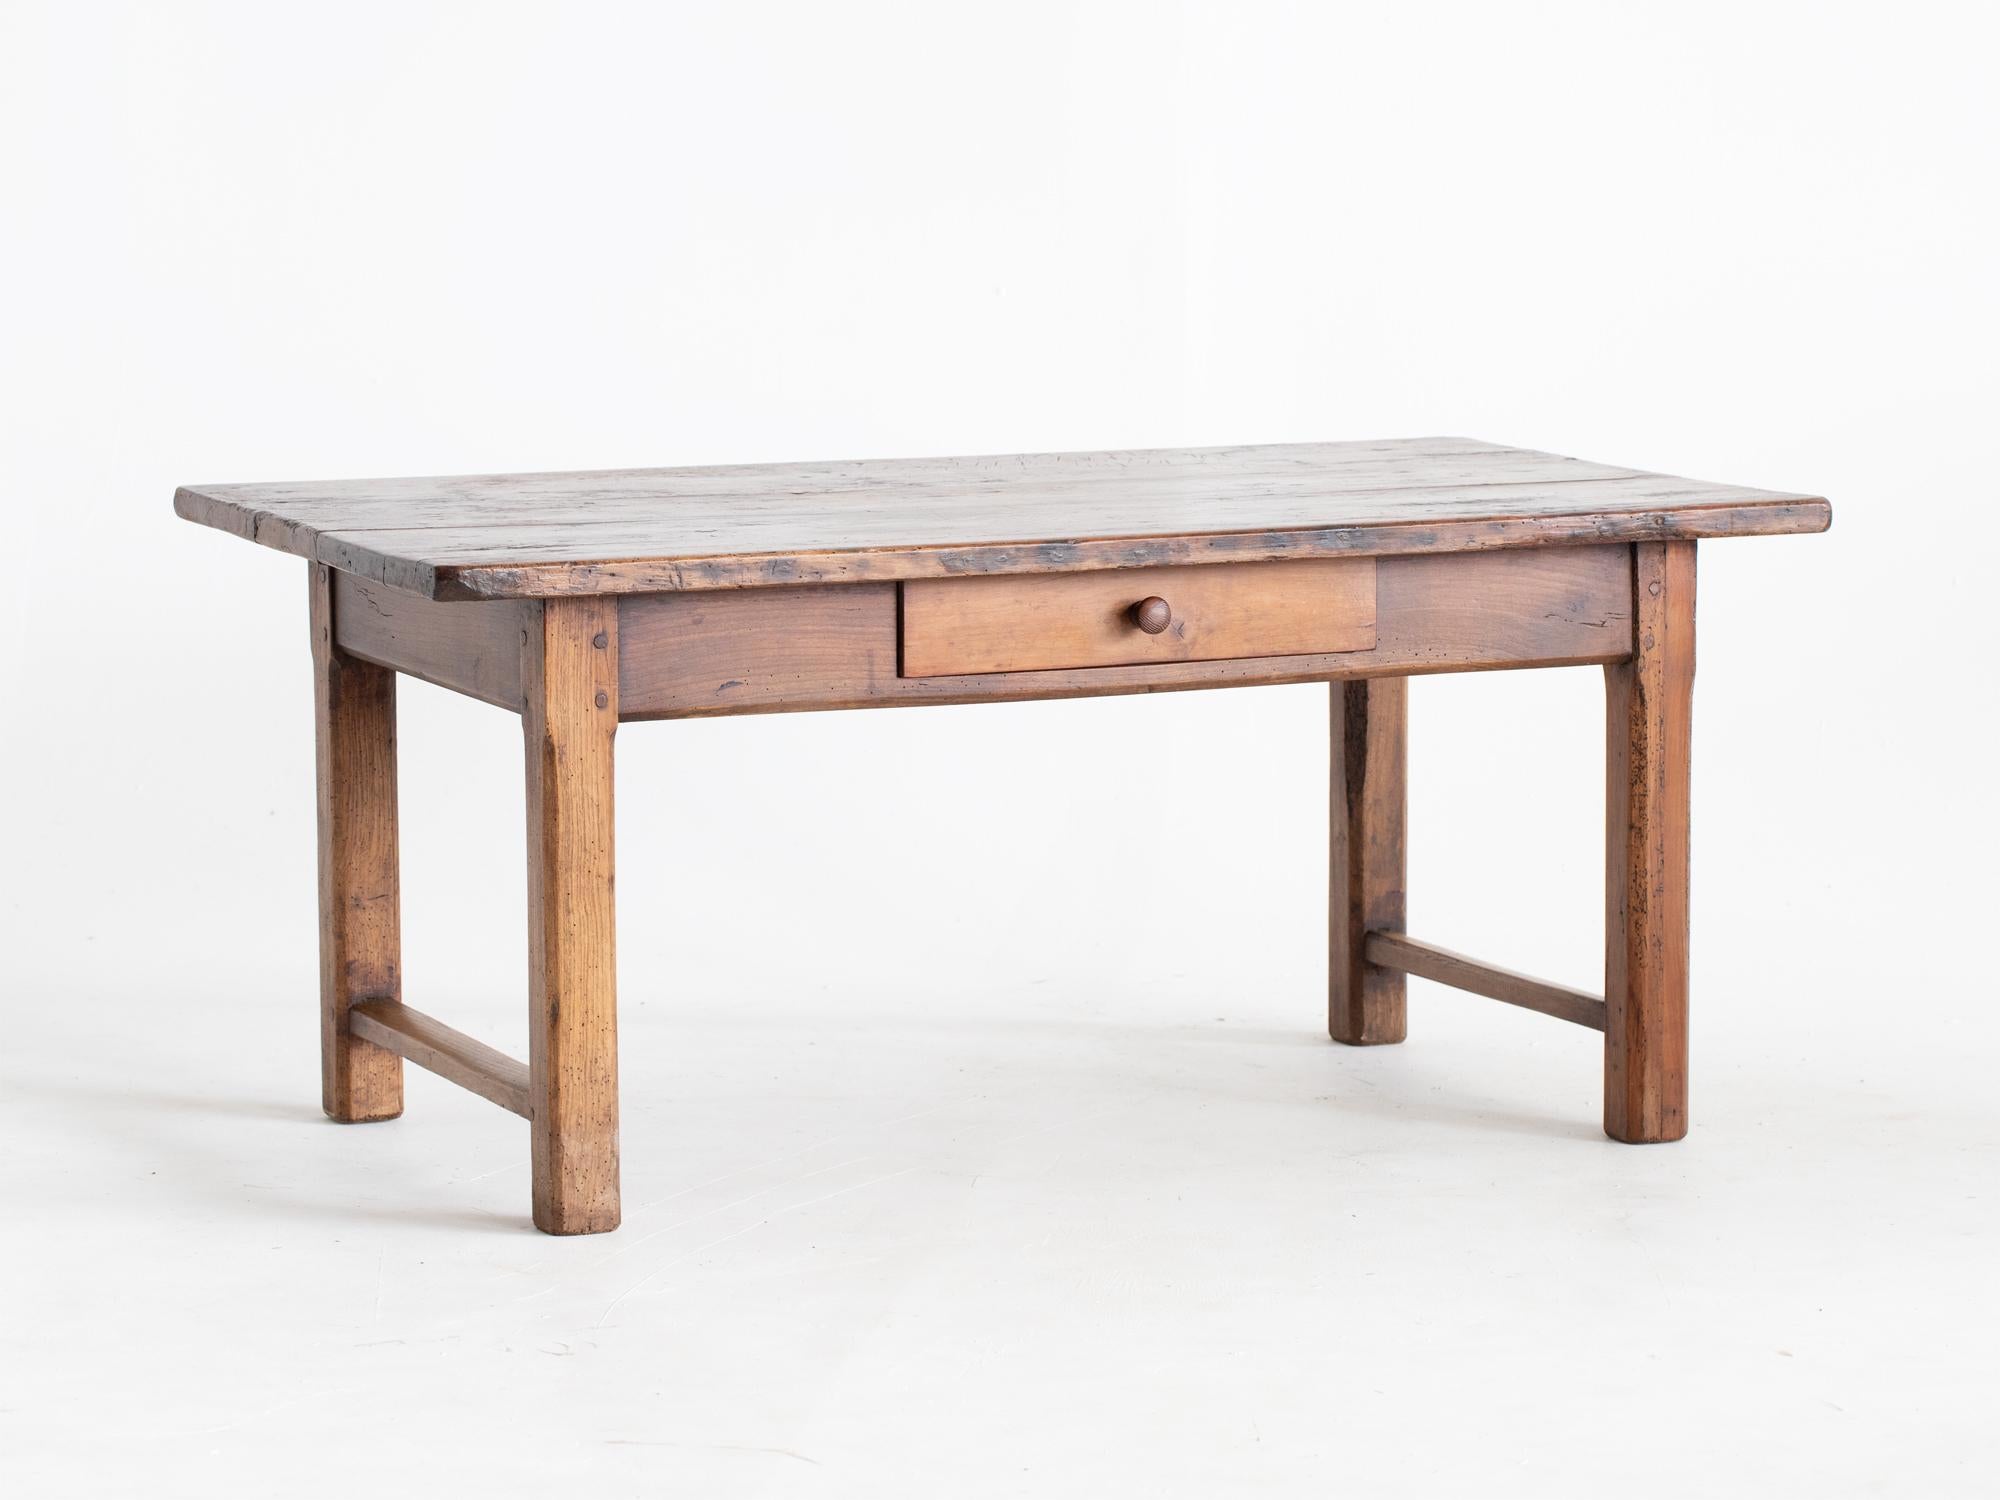 A rustic beech coffee table adapted from a larger 19C French farmhouse table.

Stock ref. #2249

In good sturdy order with characterful wear throughout. Traces of historic worm all treated as a precautionary and preventative measure.

50.5 x 114.5 x